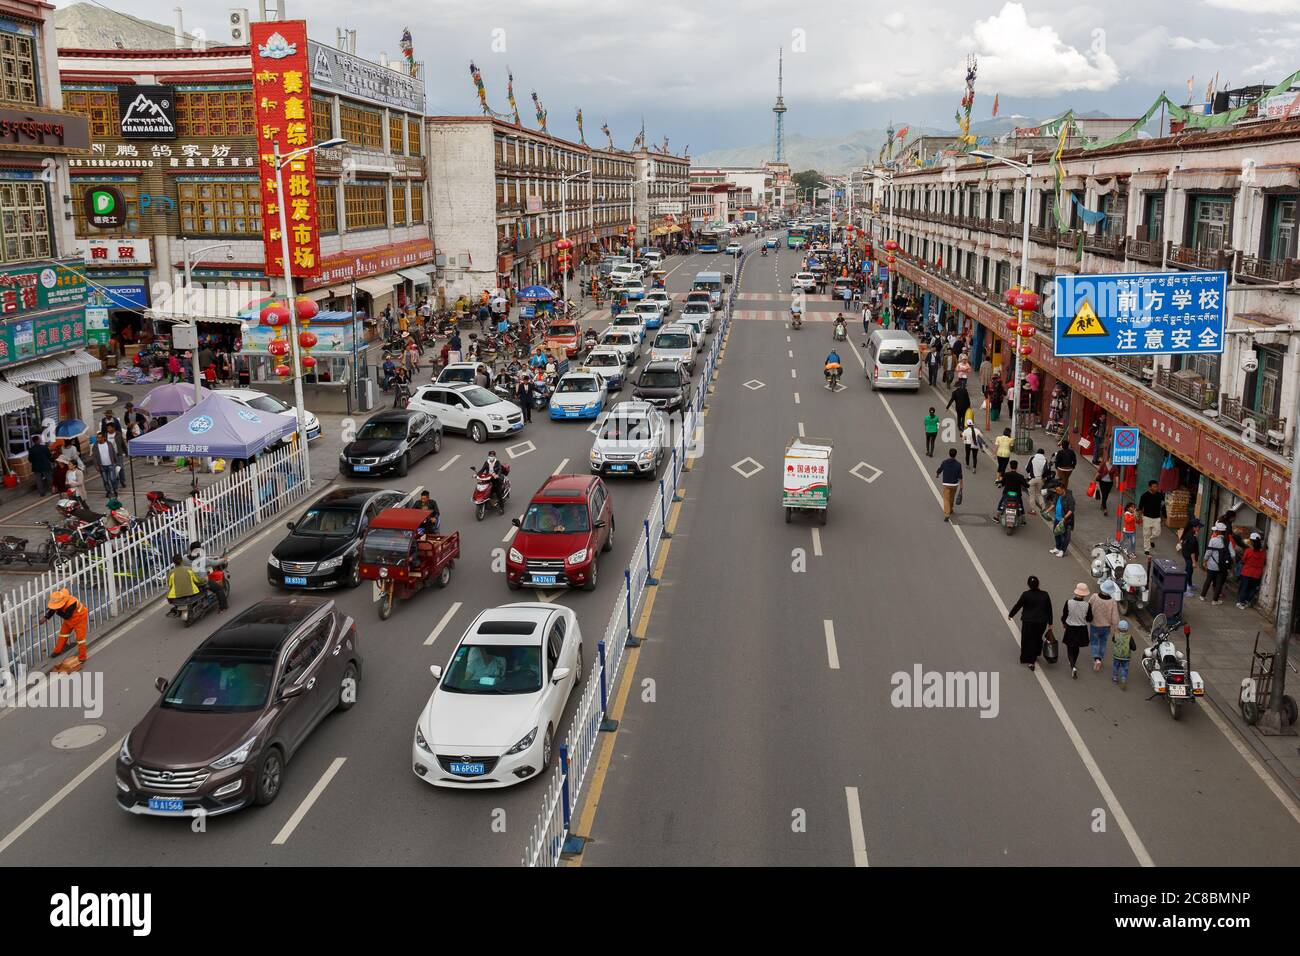 Lhasa, Tibet / China - Jul 29, 2017: View on the busy main street of Lhasa (capital of Tibet). On the left lane a traffic jam. On the left and right s Stock Photo